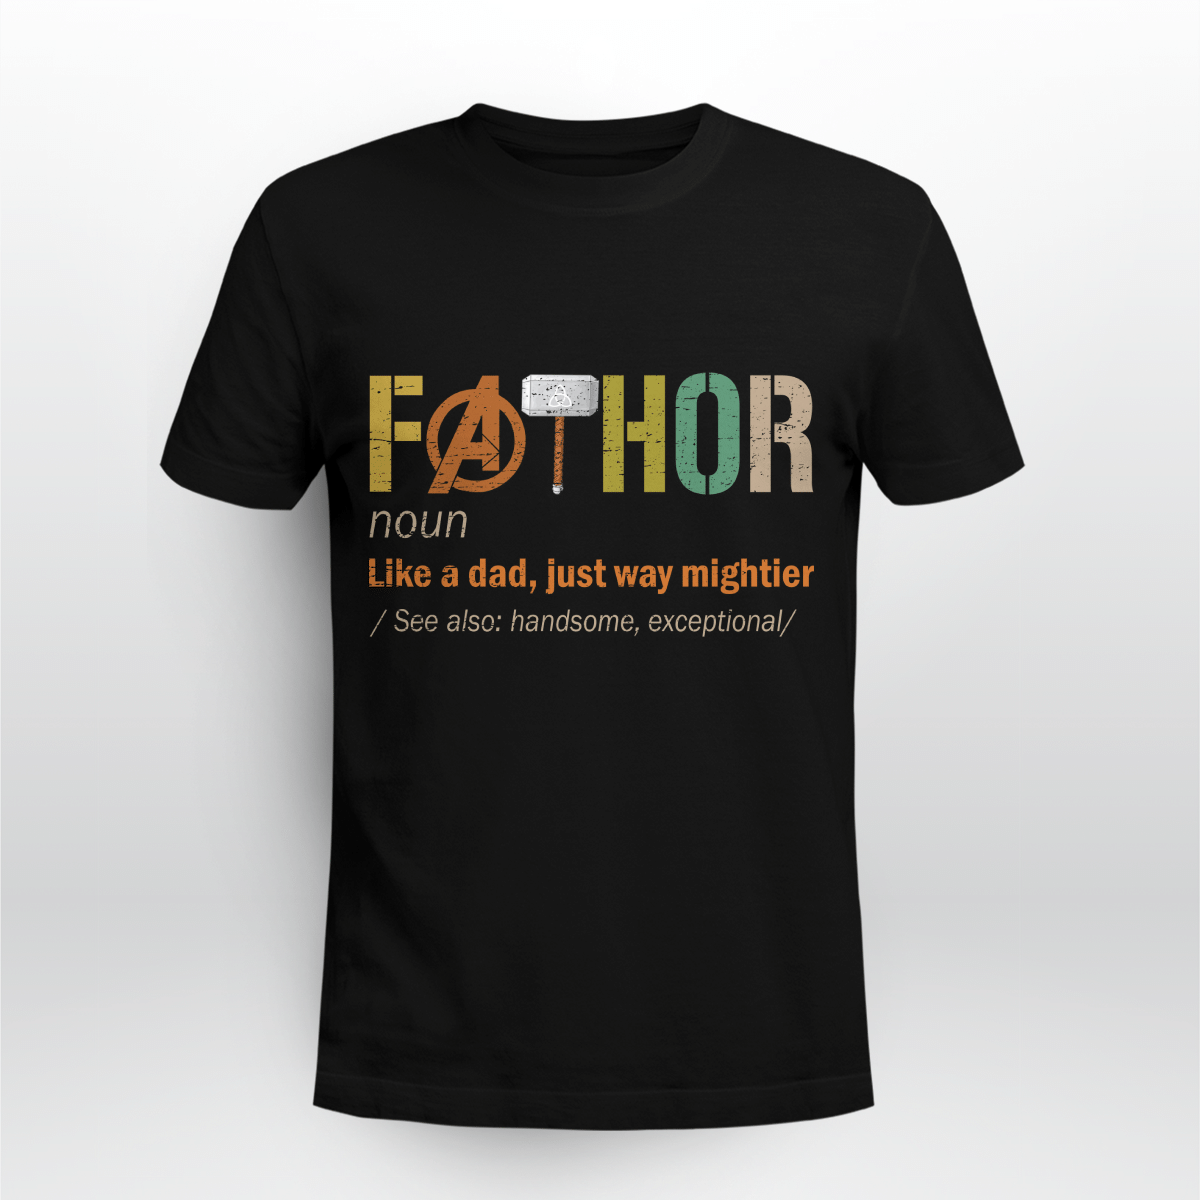 Fathor (noun) Like A Dad, Just Way Mightier Shirt Style: Unisex T-shirt, Color: Black